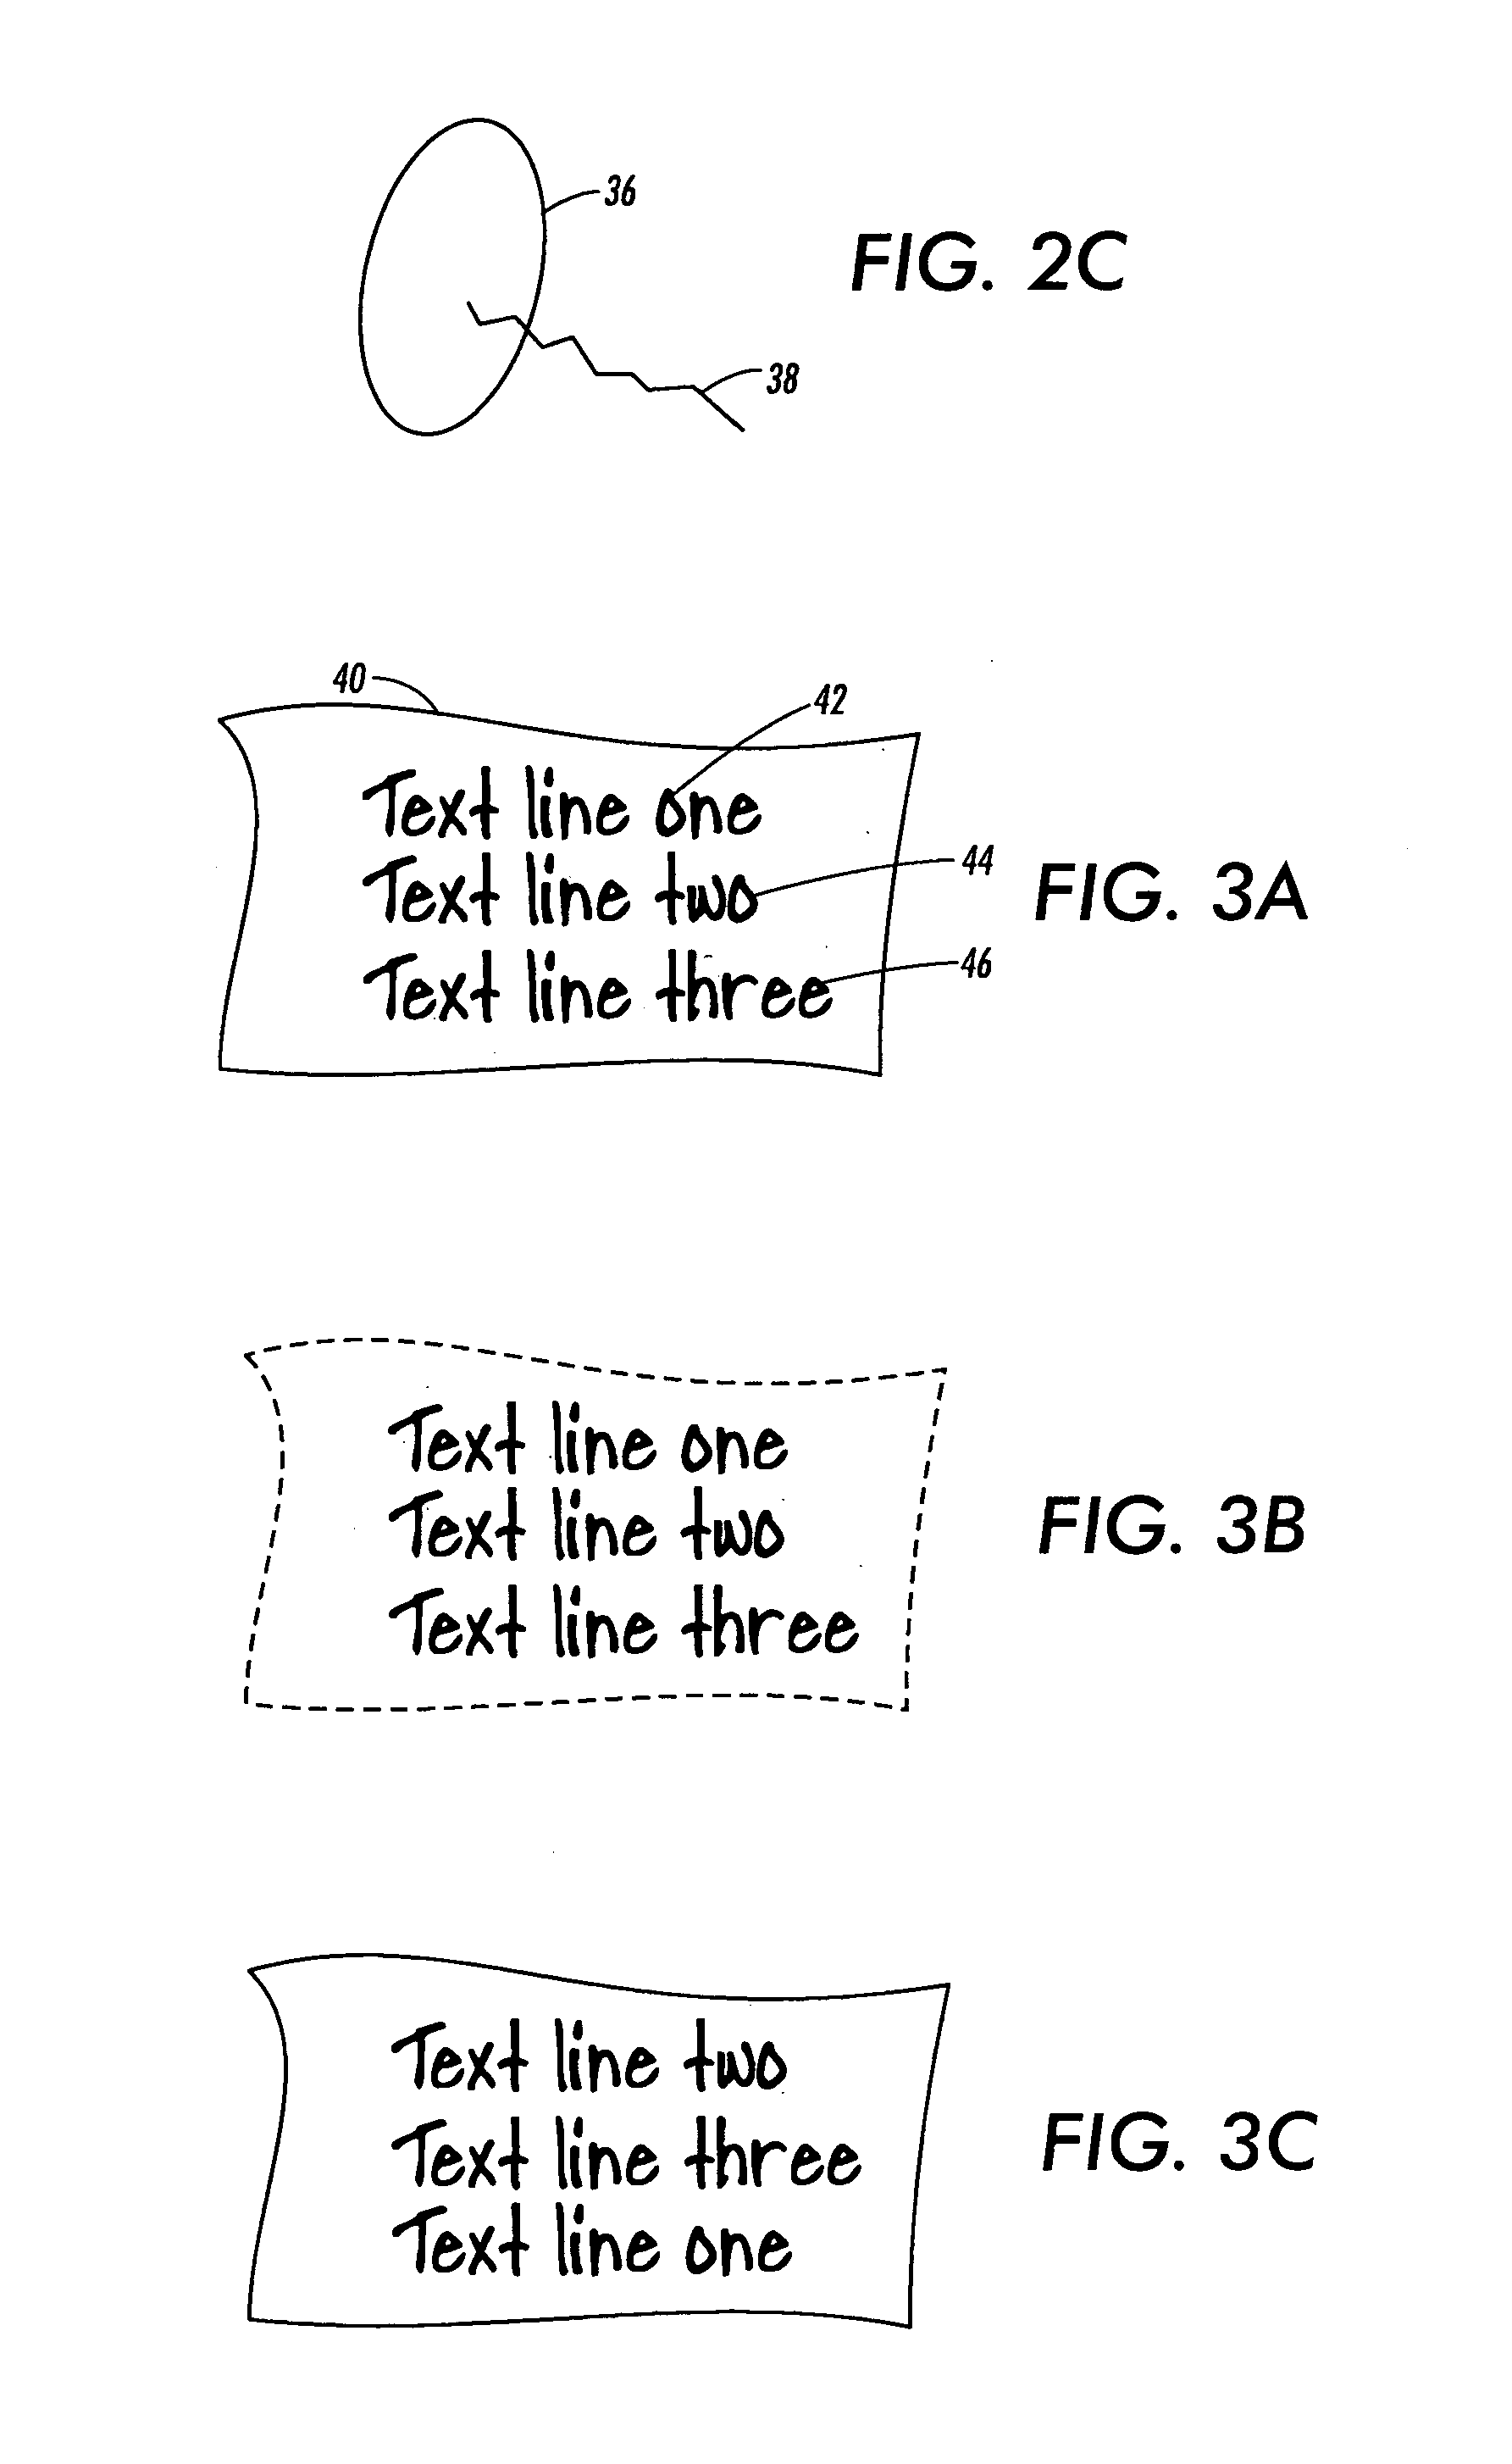 Method and apparatus to convert bitmapped images for use in a structured text/graphics editor